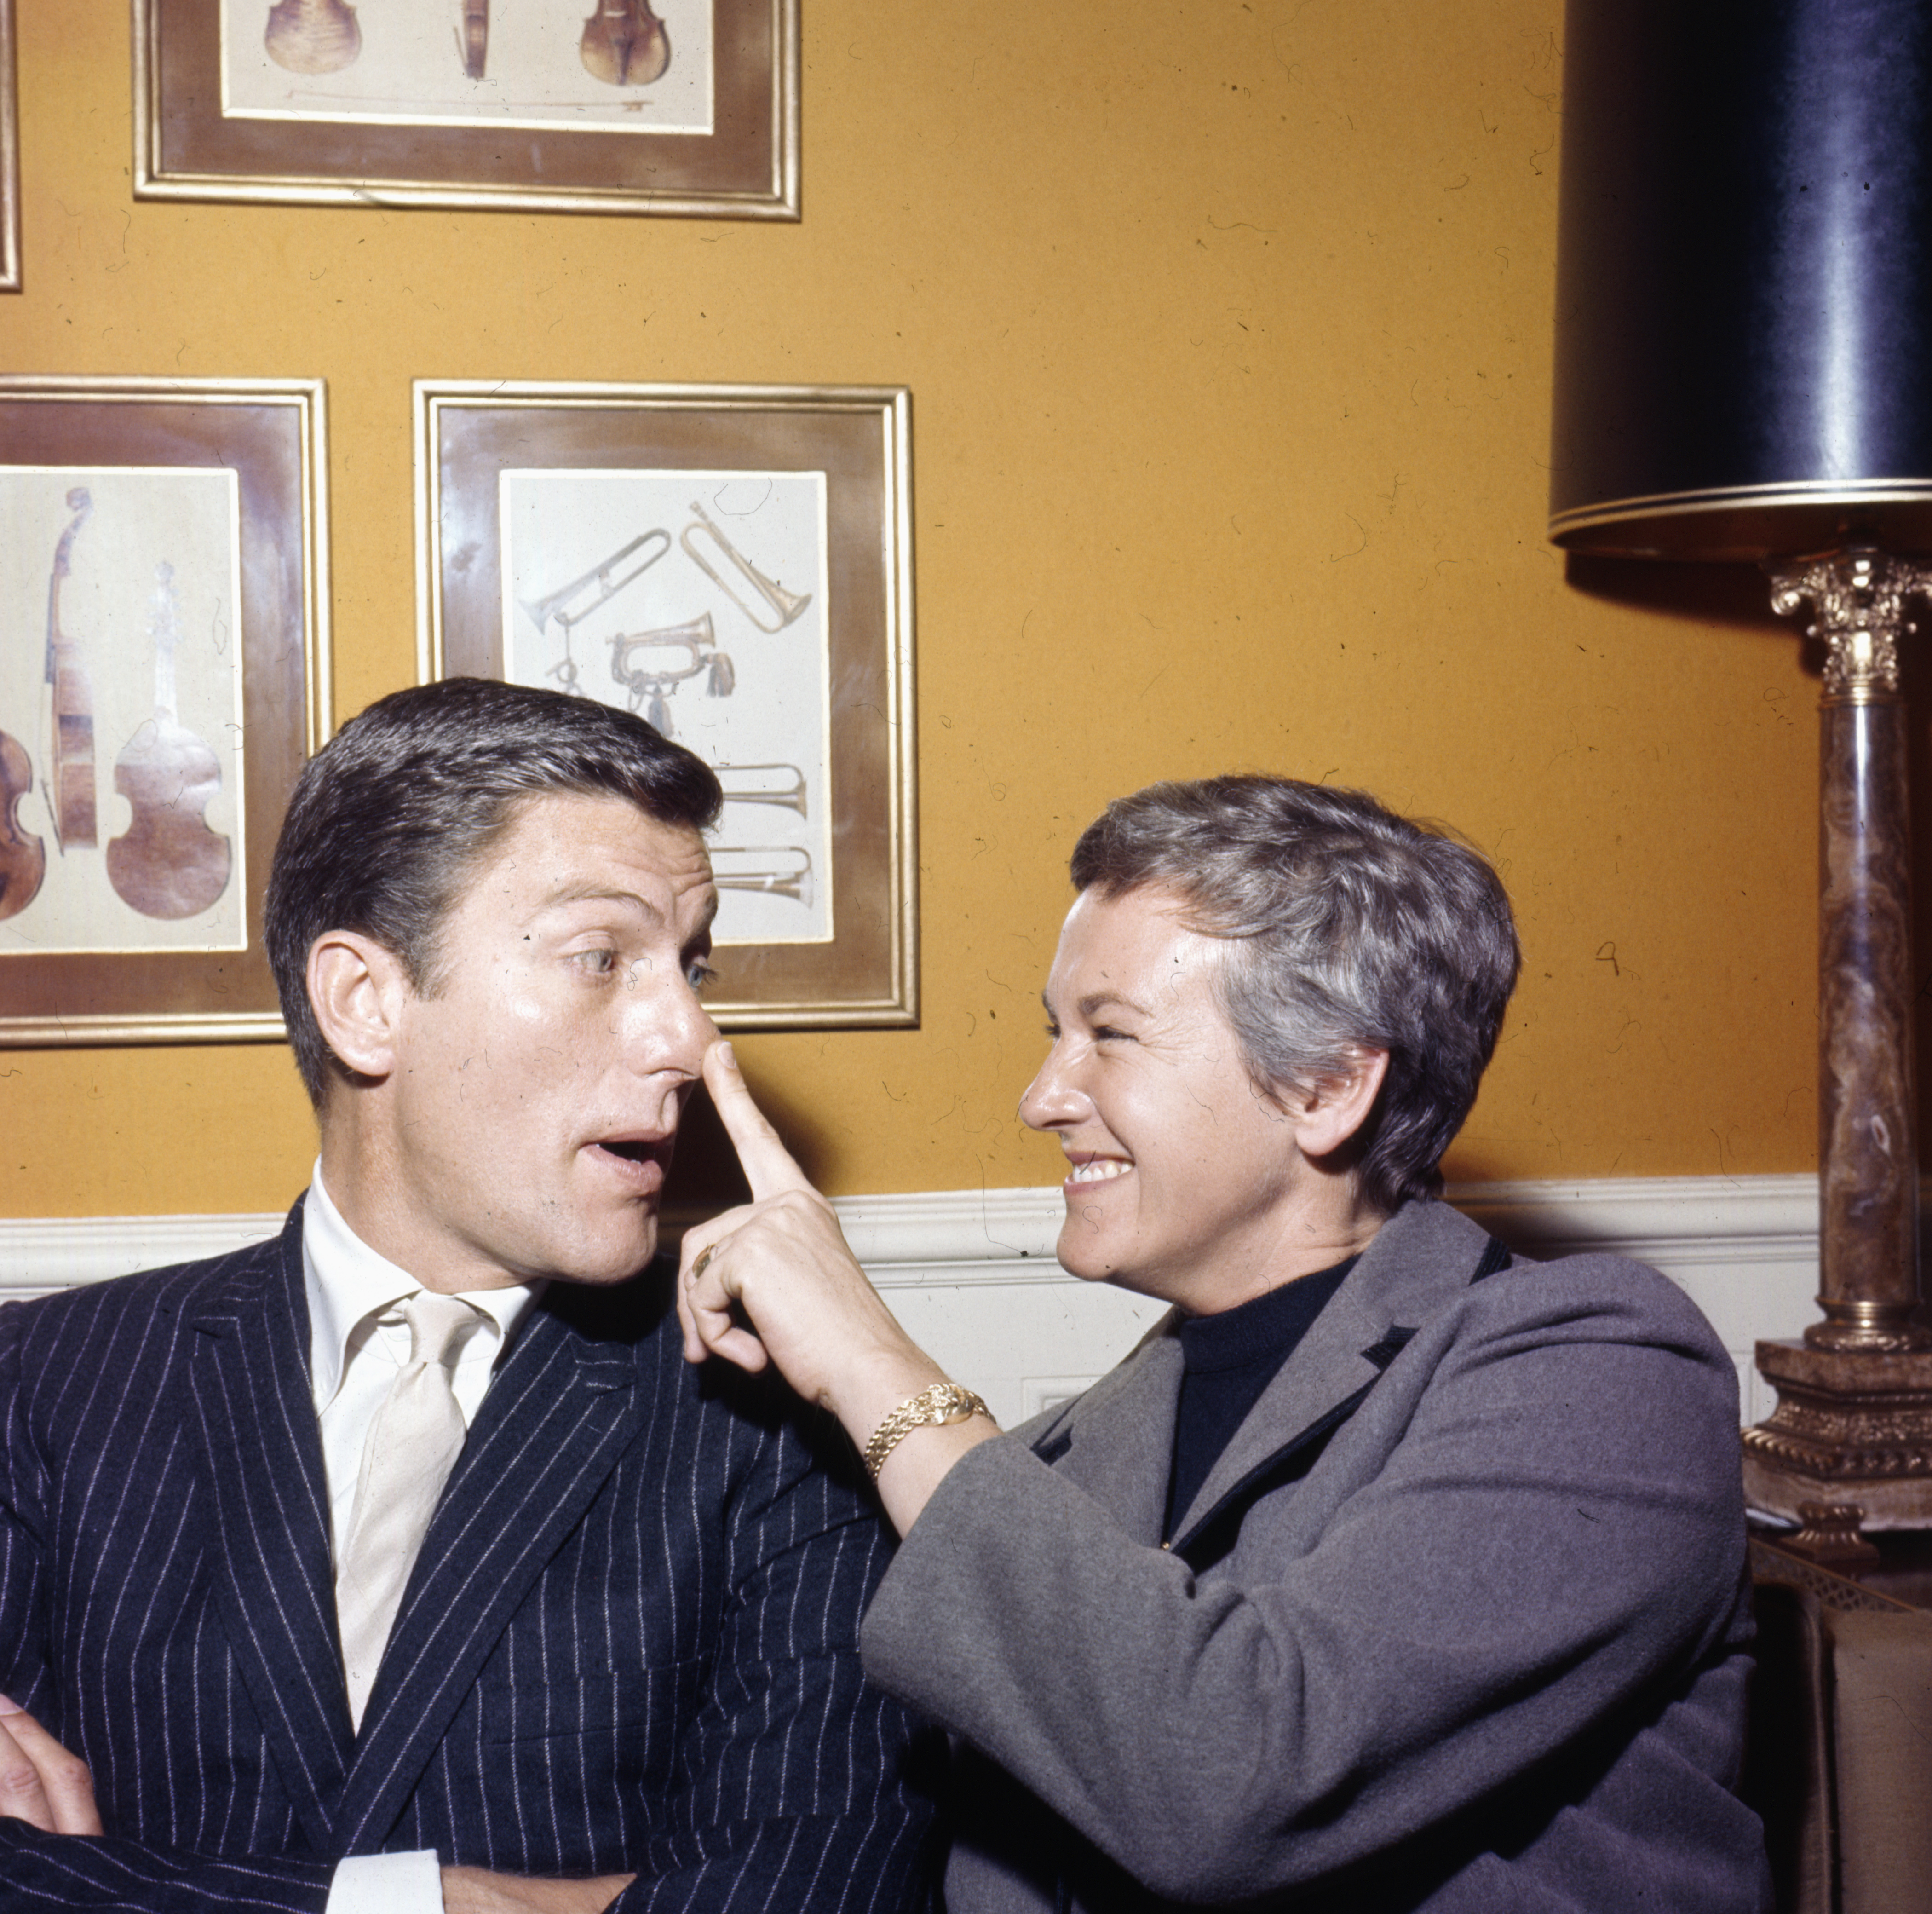 American actor Dick Van Dyke pictured with his wife Margie Willett in London in 1964. | Source: Getty Images